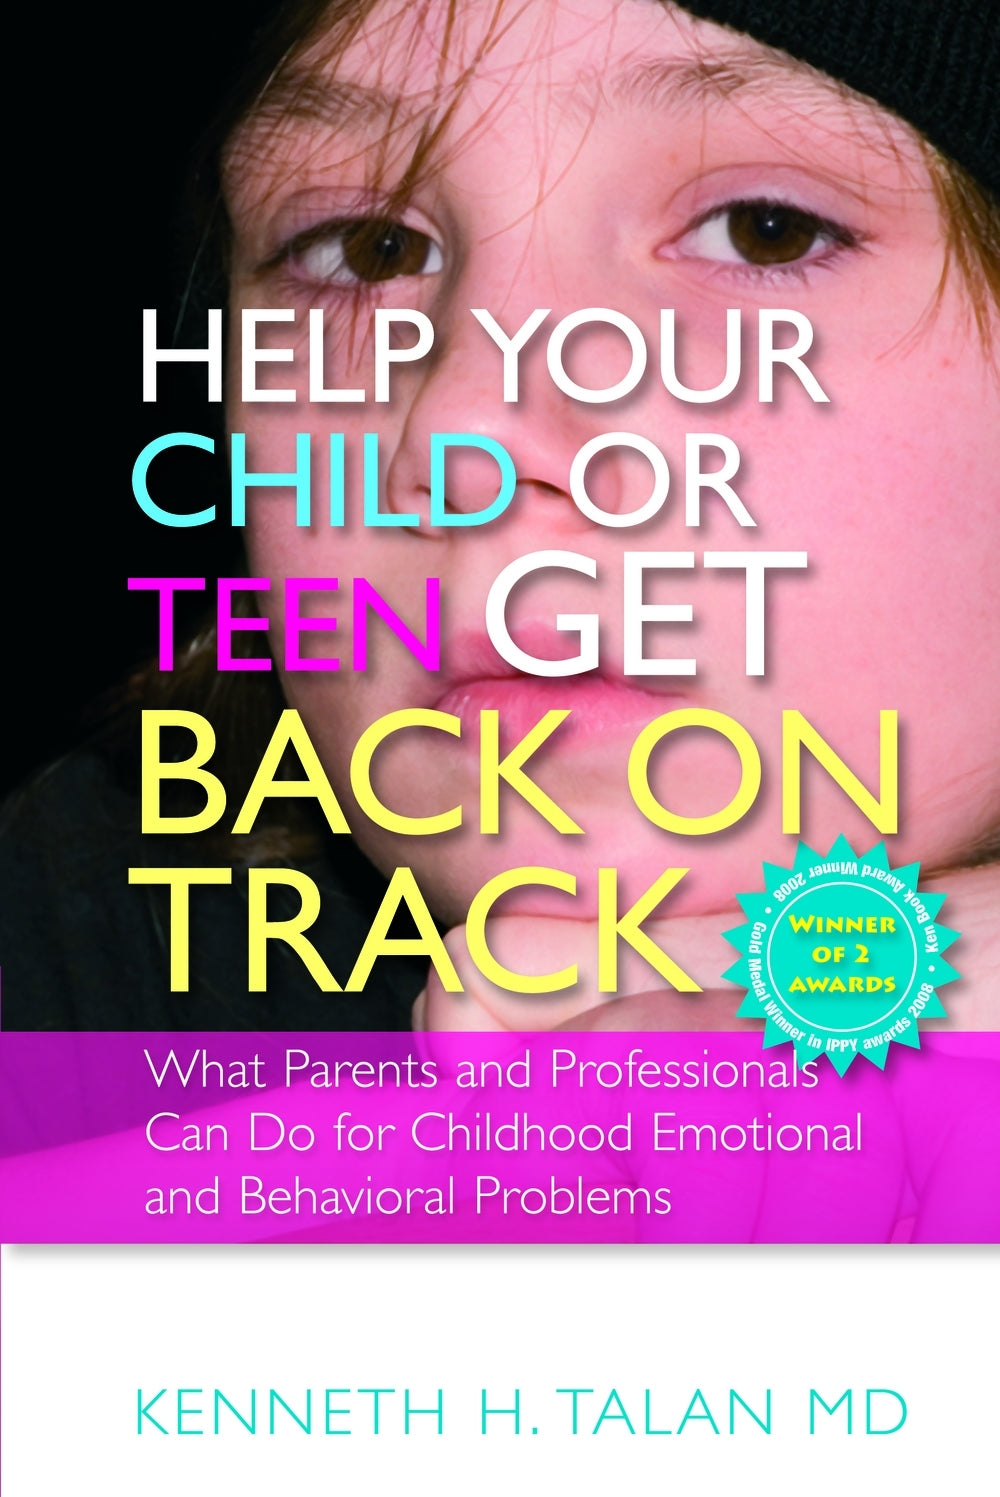 Help your Child or Teen Get Back On Track by Kenneth Talan